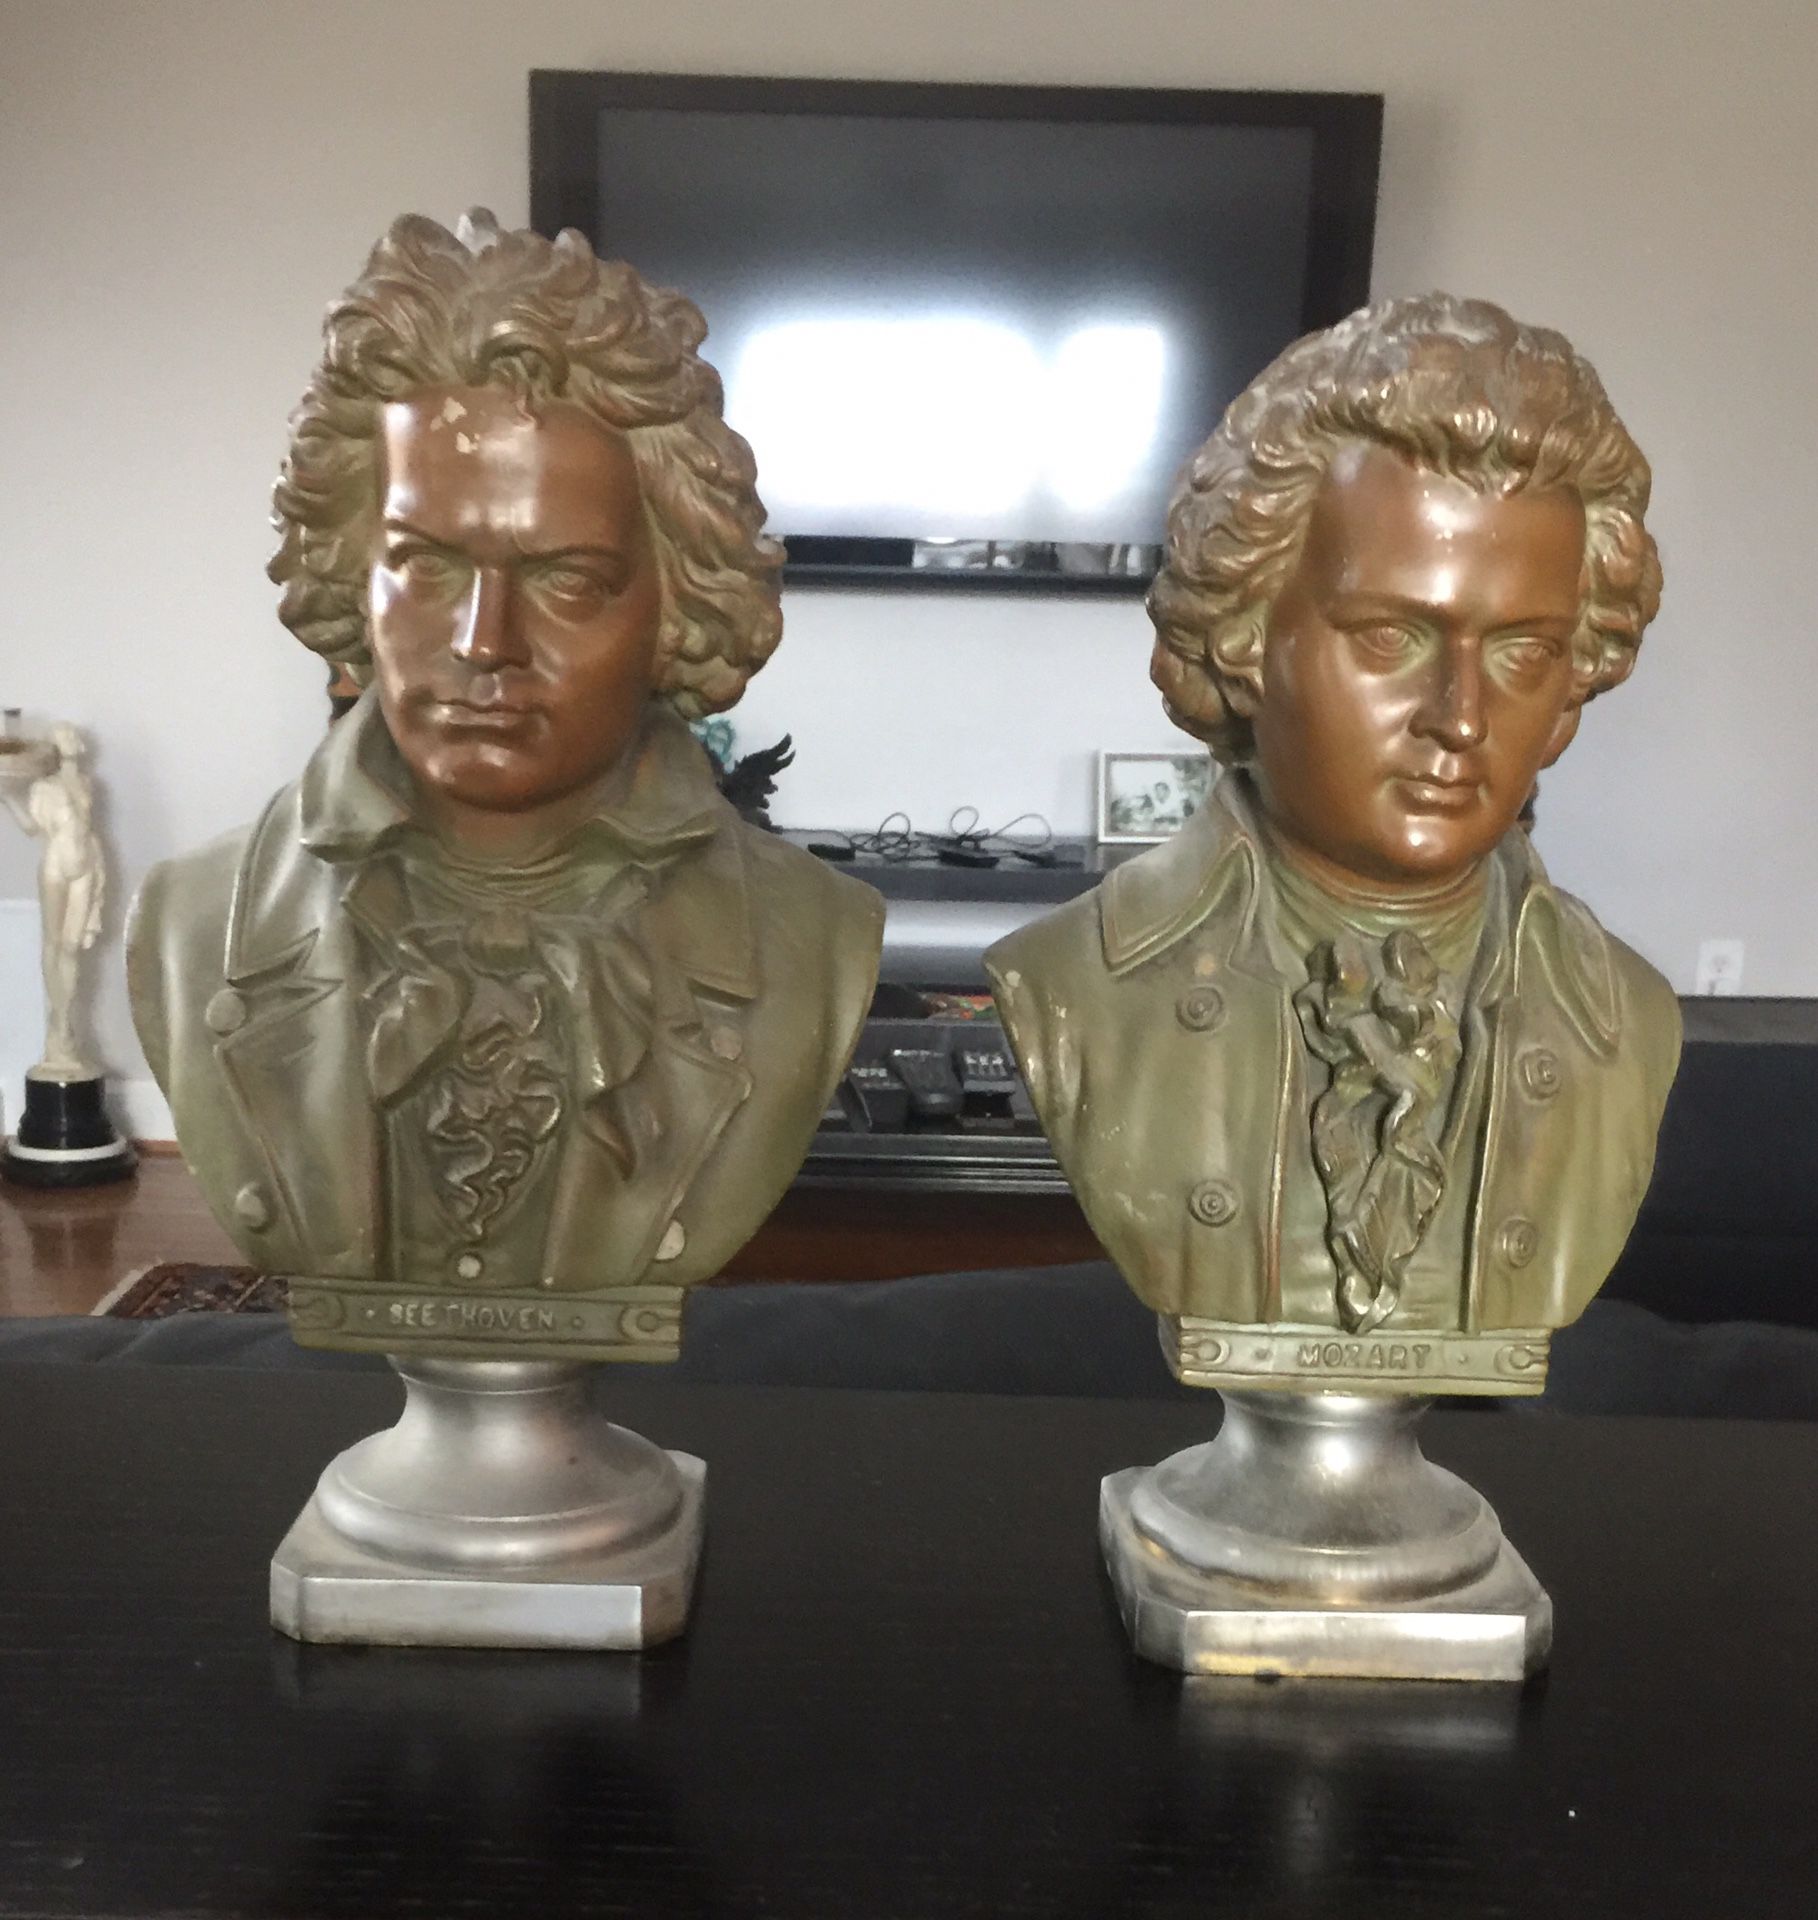 Cast Iron Busts of Beethoven and Mozart